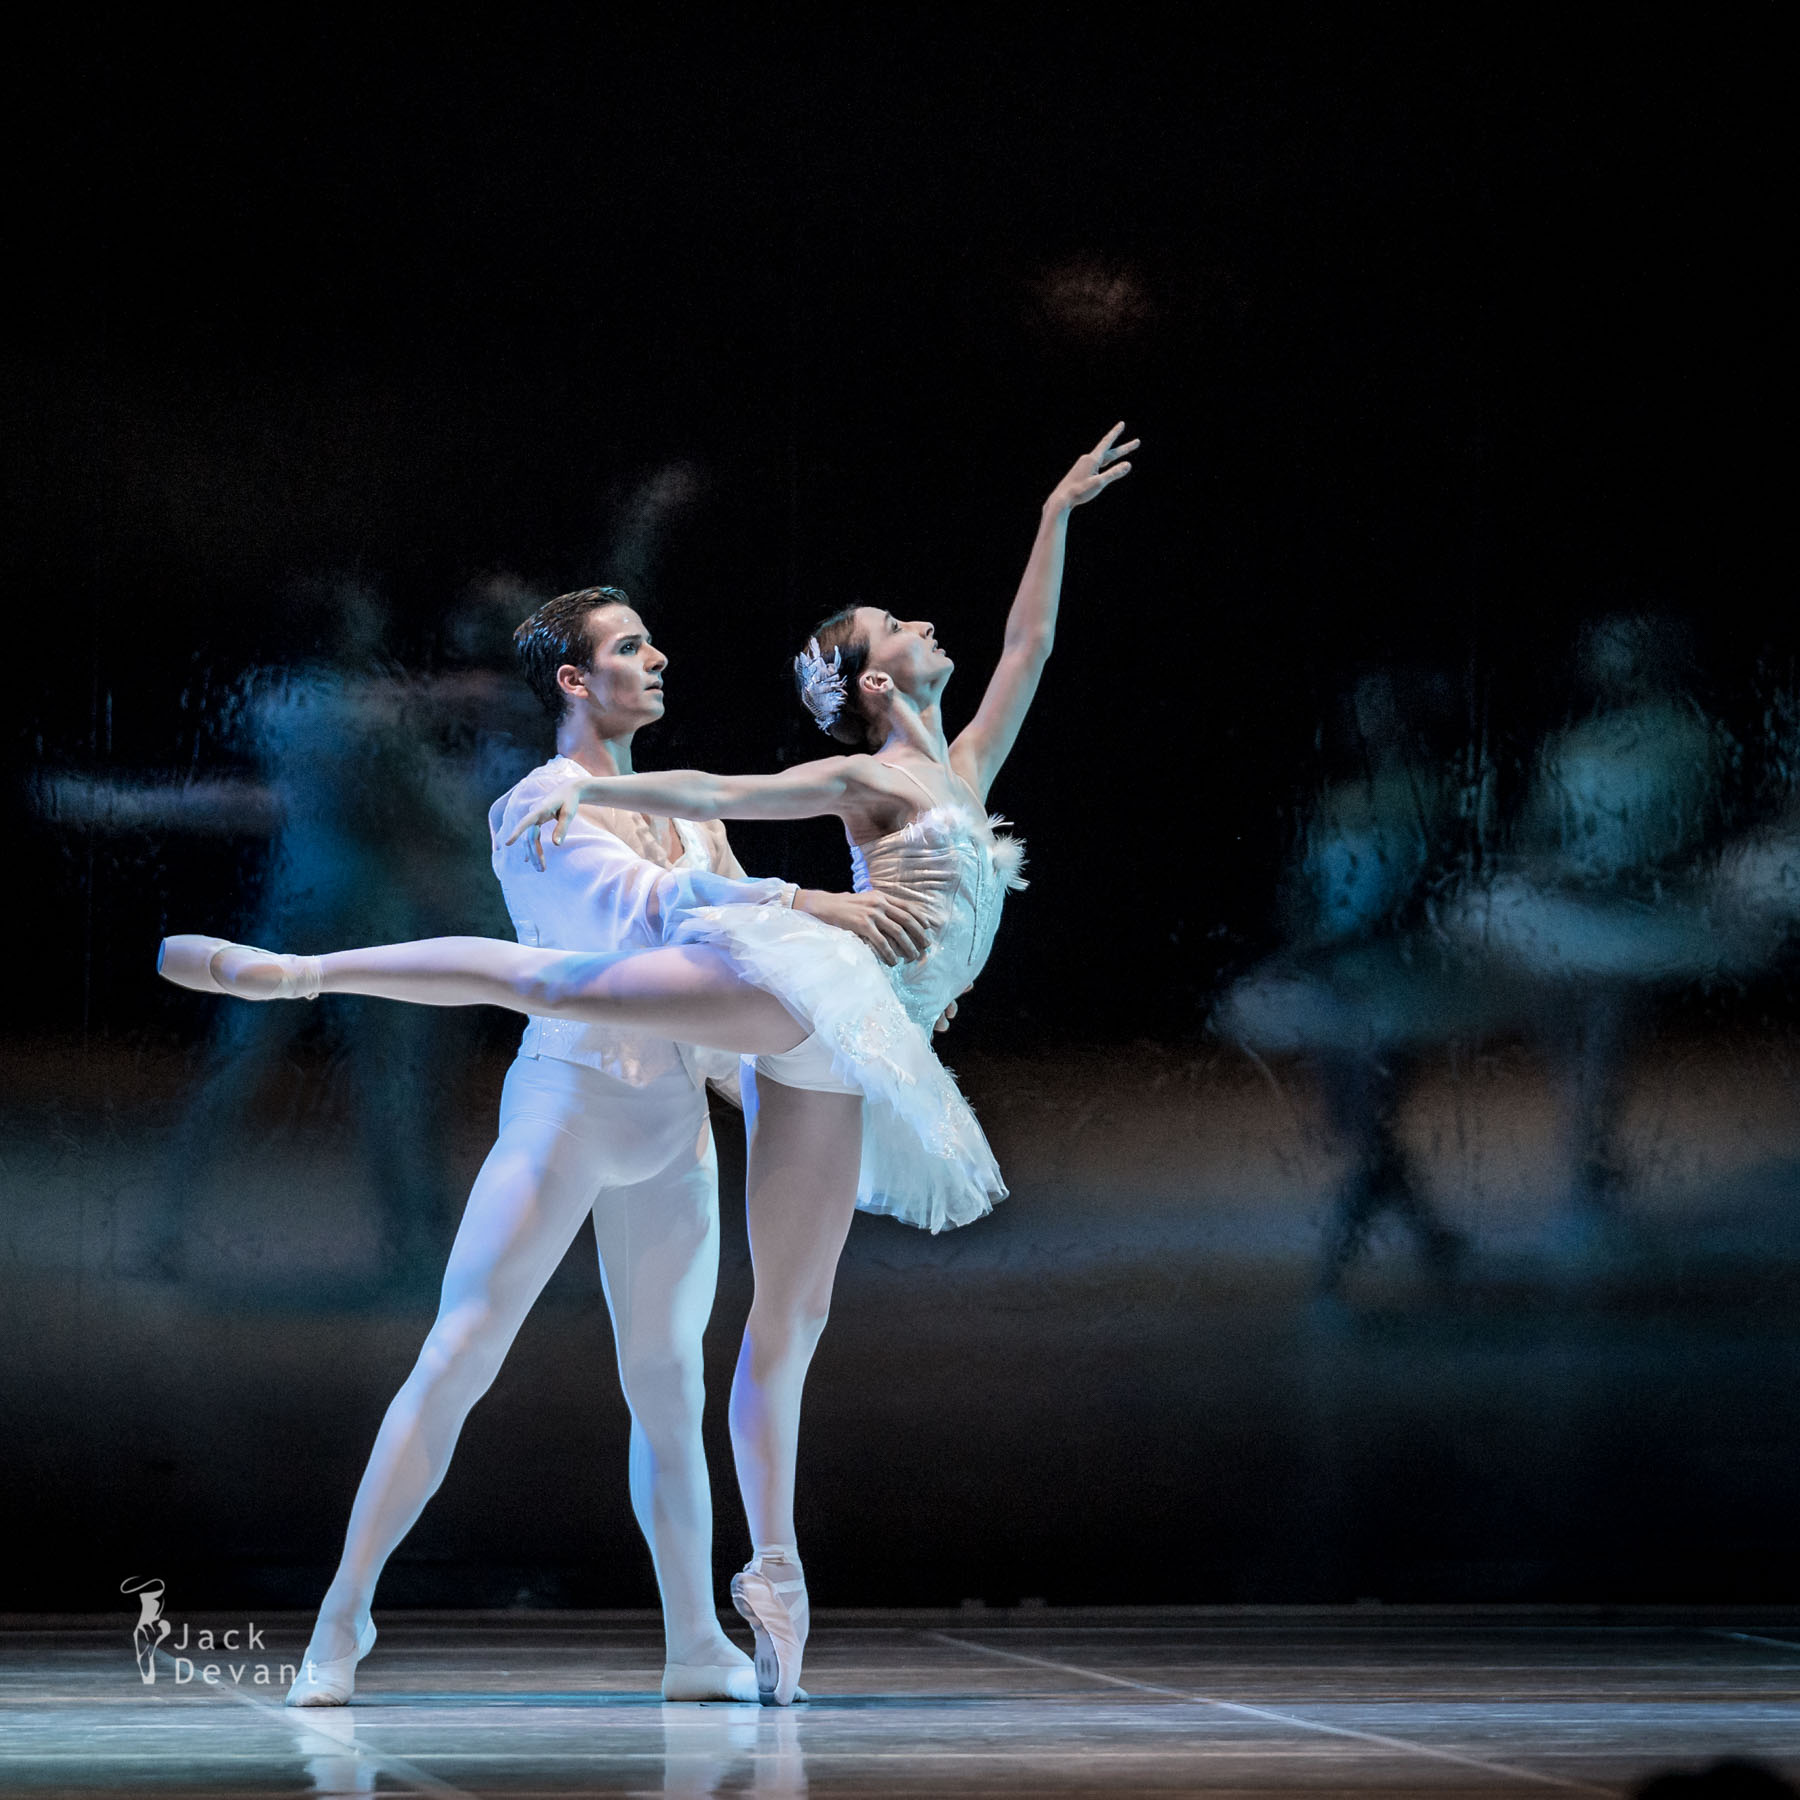 Balletto di Milano performing'Swan Lake', choraographed by Teet Kask. Photo by Jack Devant